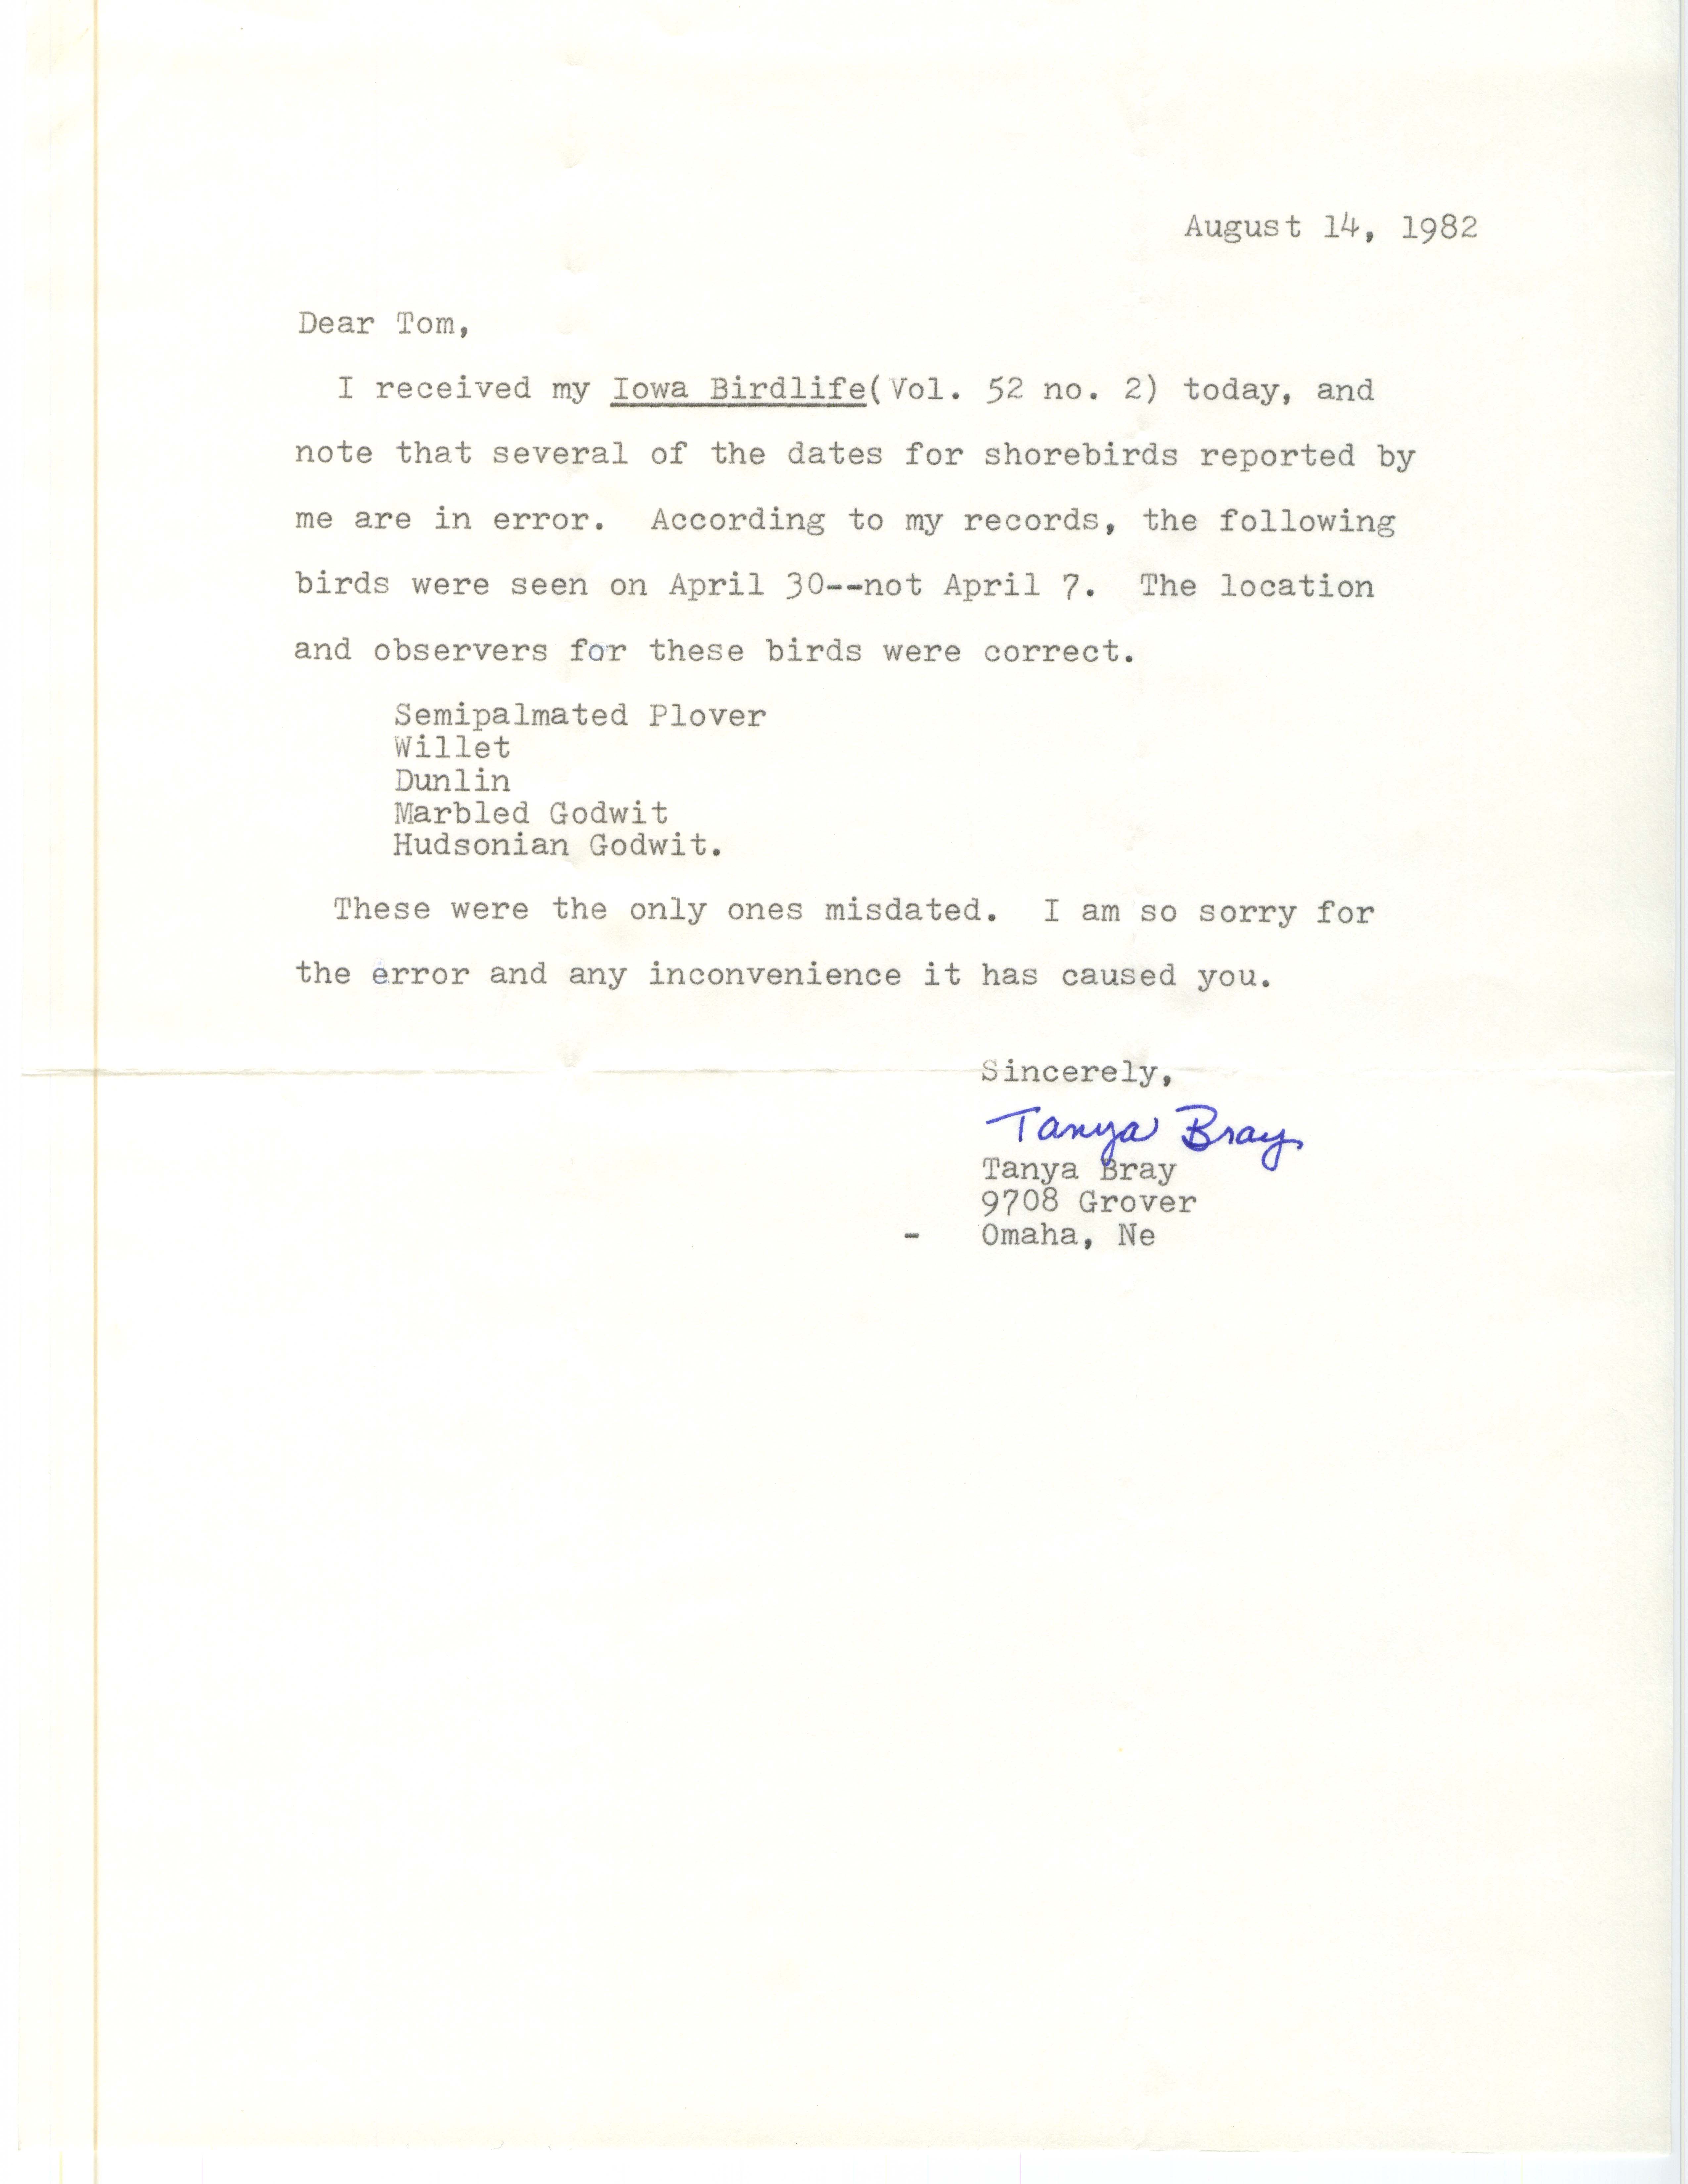 Tanya Bray letter to Thomas H. Kent regarding field notes, August 14, 1982